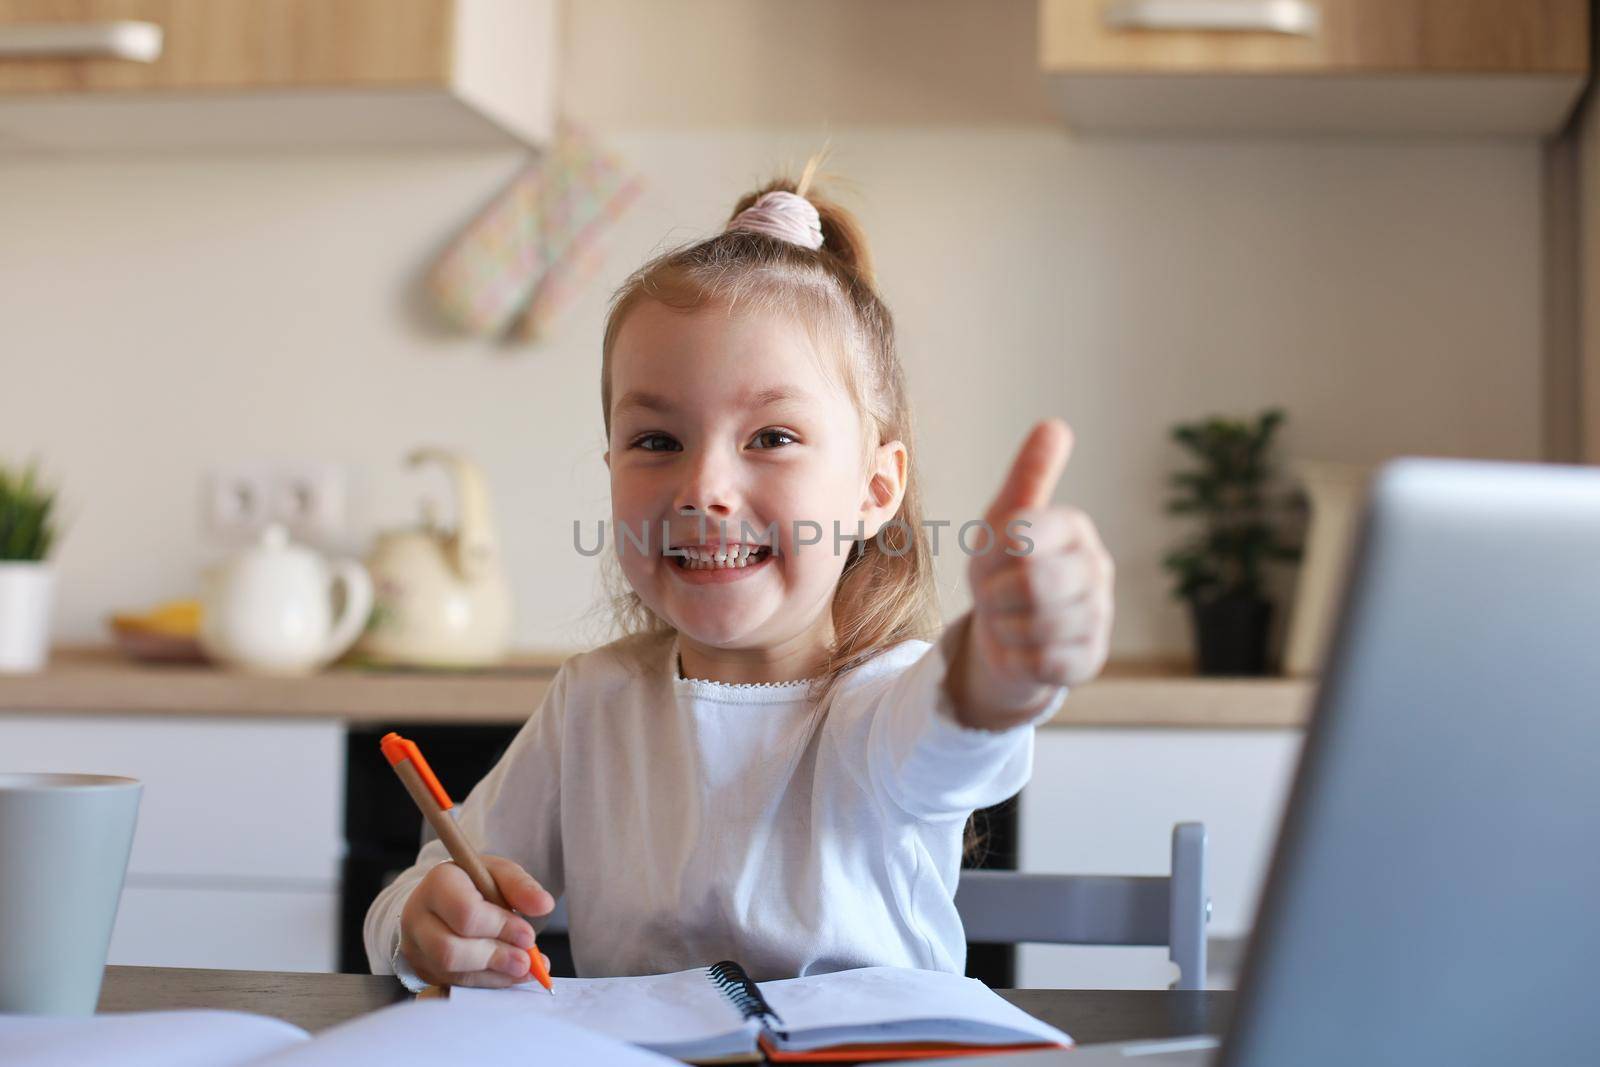 Happy little girl pupil study online using laptop at home, smiling small child show thumb up recommend class or lesson